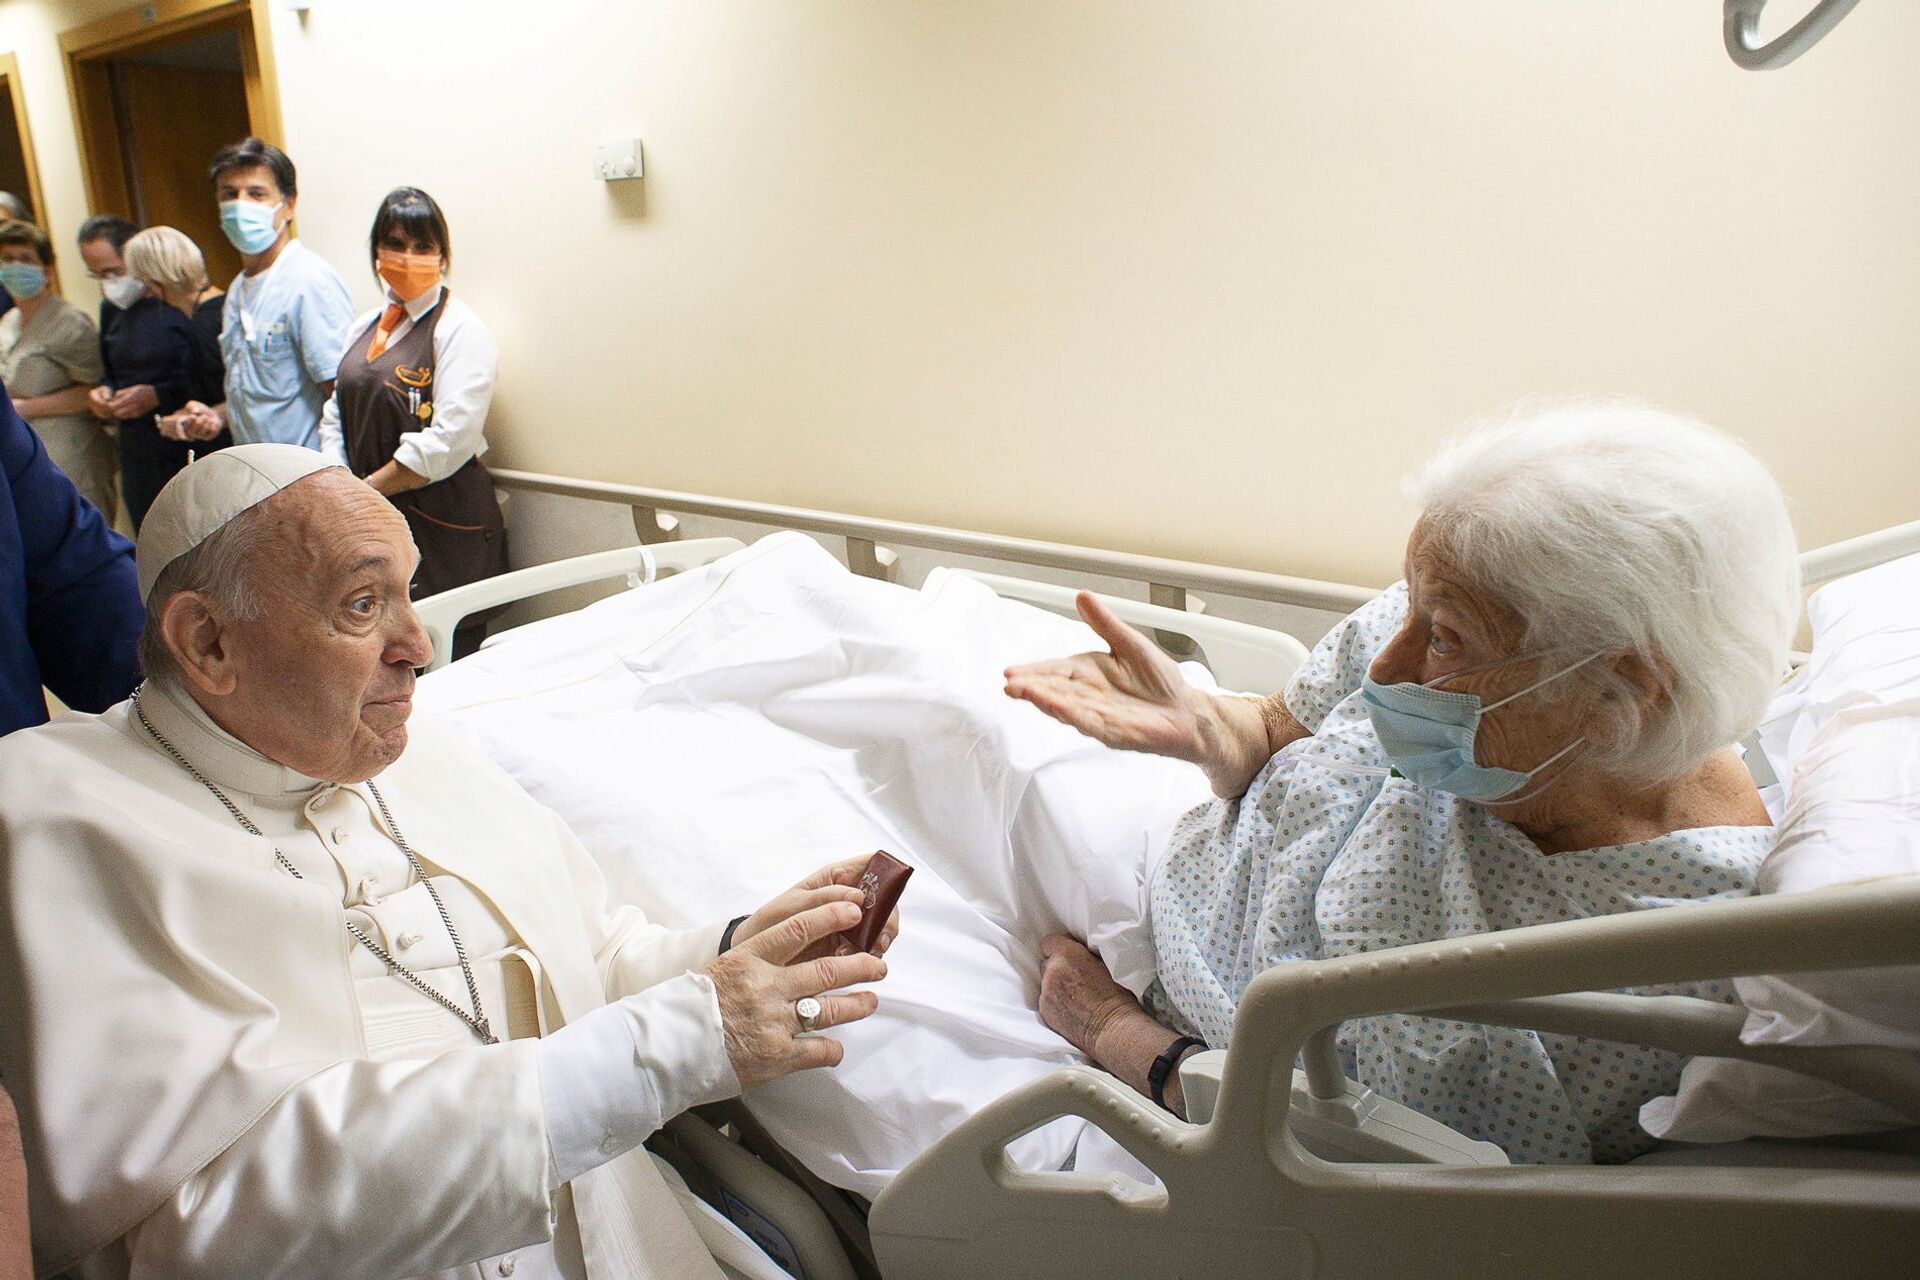 Pope Francis speaks with a patient at the Gemelli hospital, as he recovers following scheduled surgery on his colon, in Rome, Italy, July 11, 2021. - Sputnik International, 1920, 07.09.2021